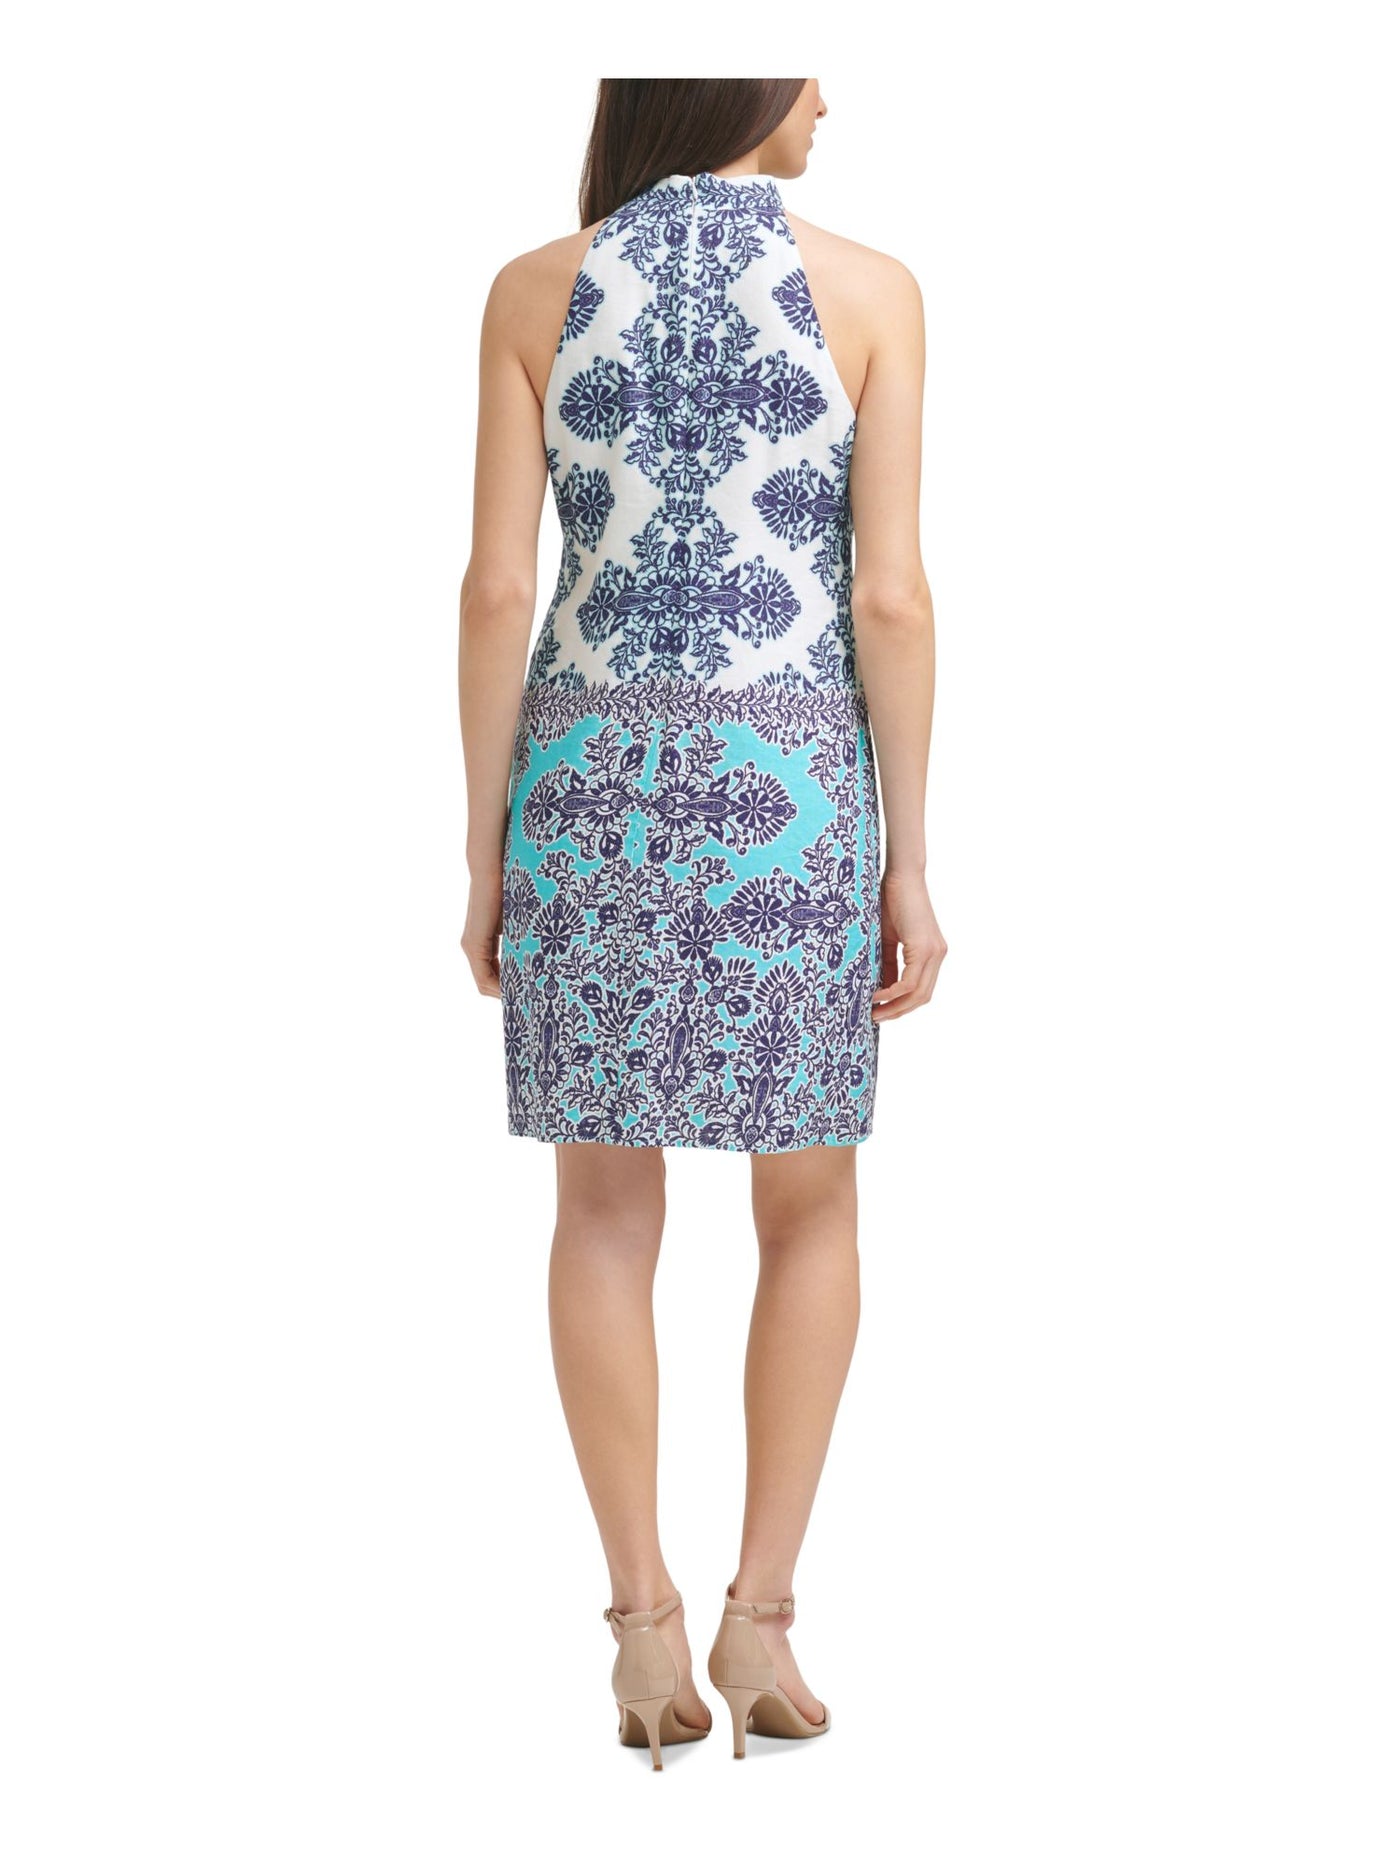 VINCE CAMUTO Womens Blue Zippered Tie Fitted Floral Sleeveless Halter Above The Knee Shift Dress 4